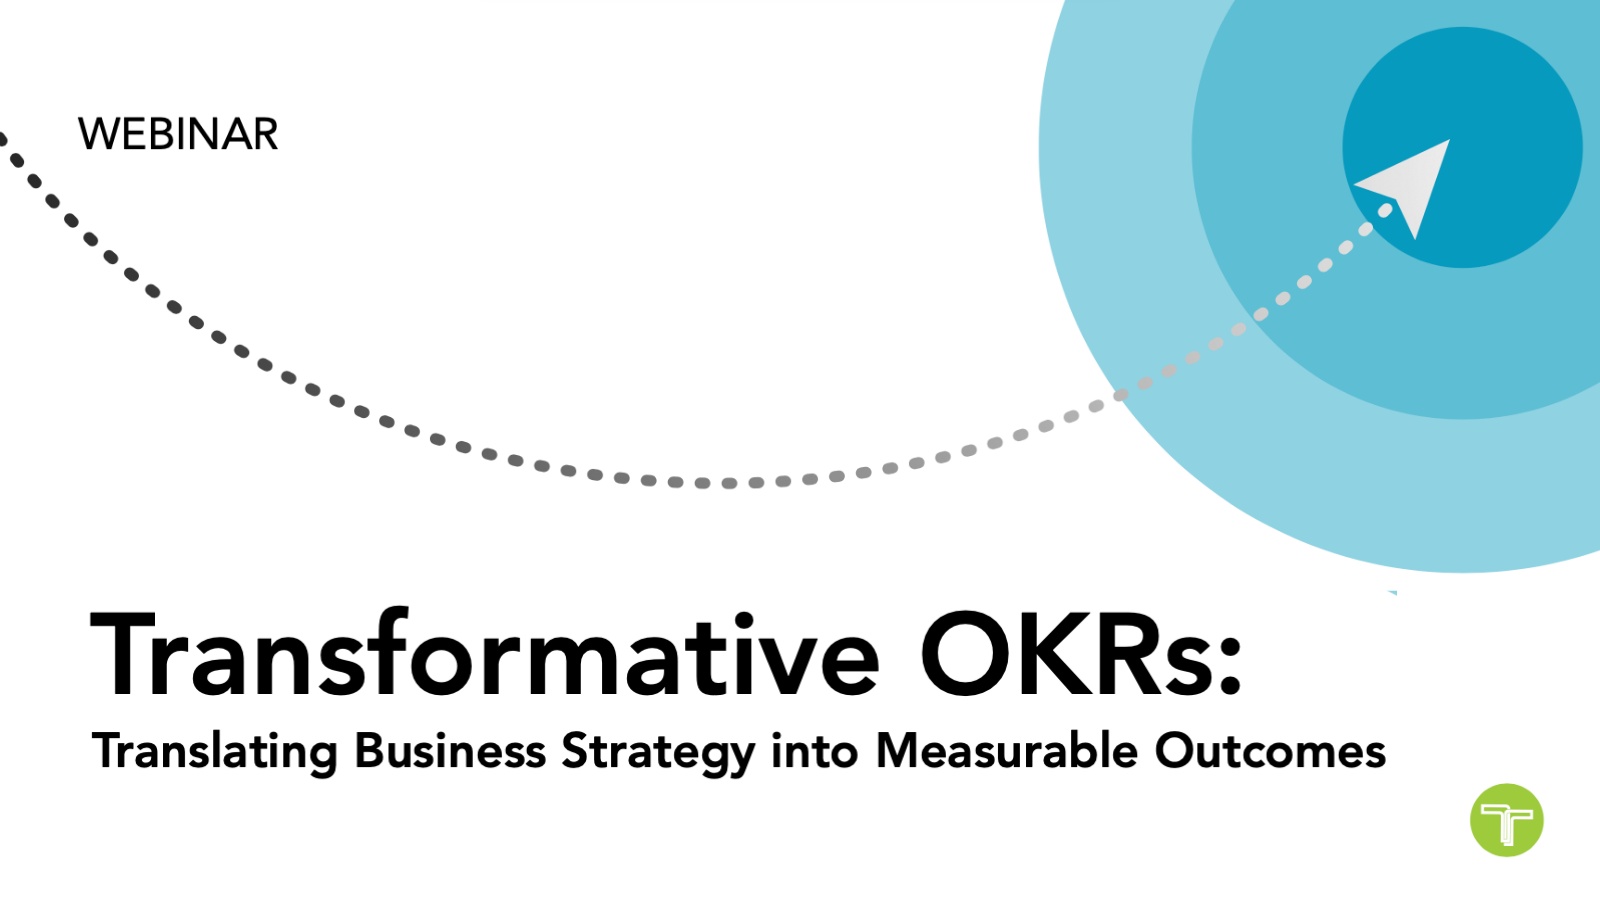 Transformative OKRs: Translating Business Strategy into Measurable Outcomes